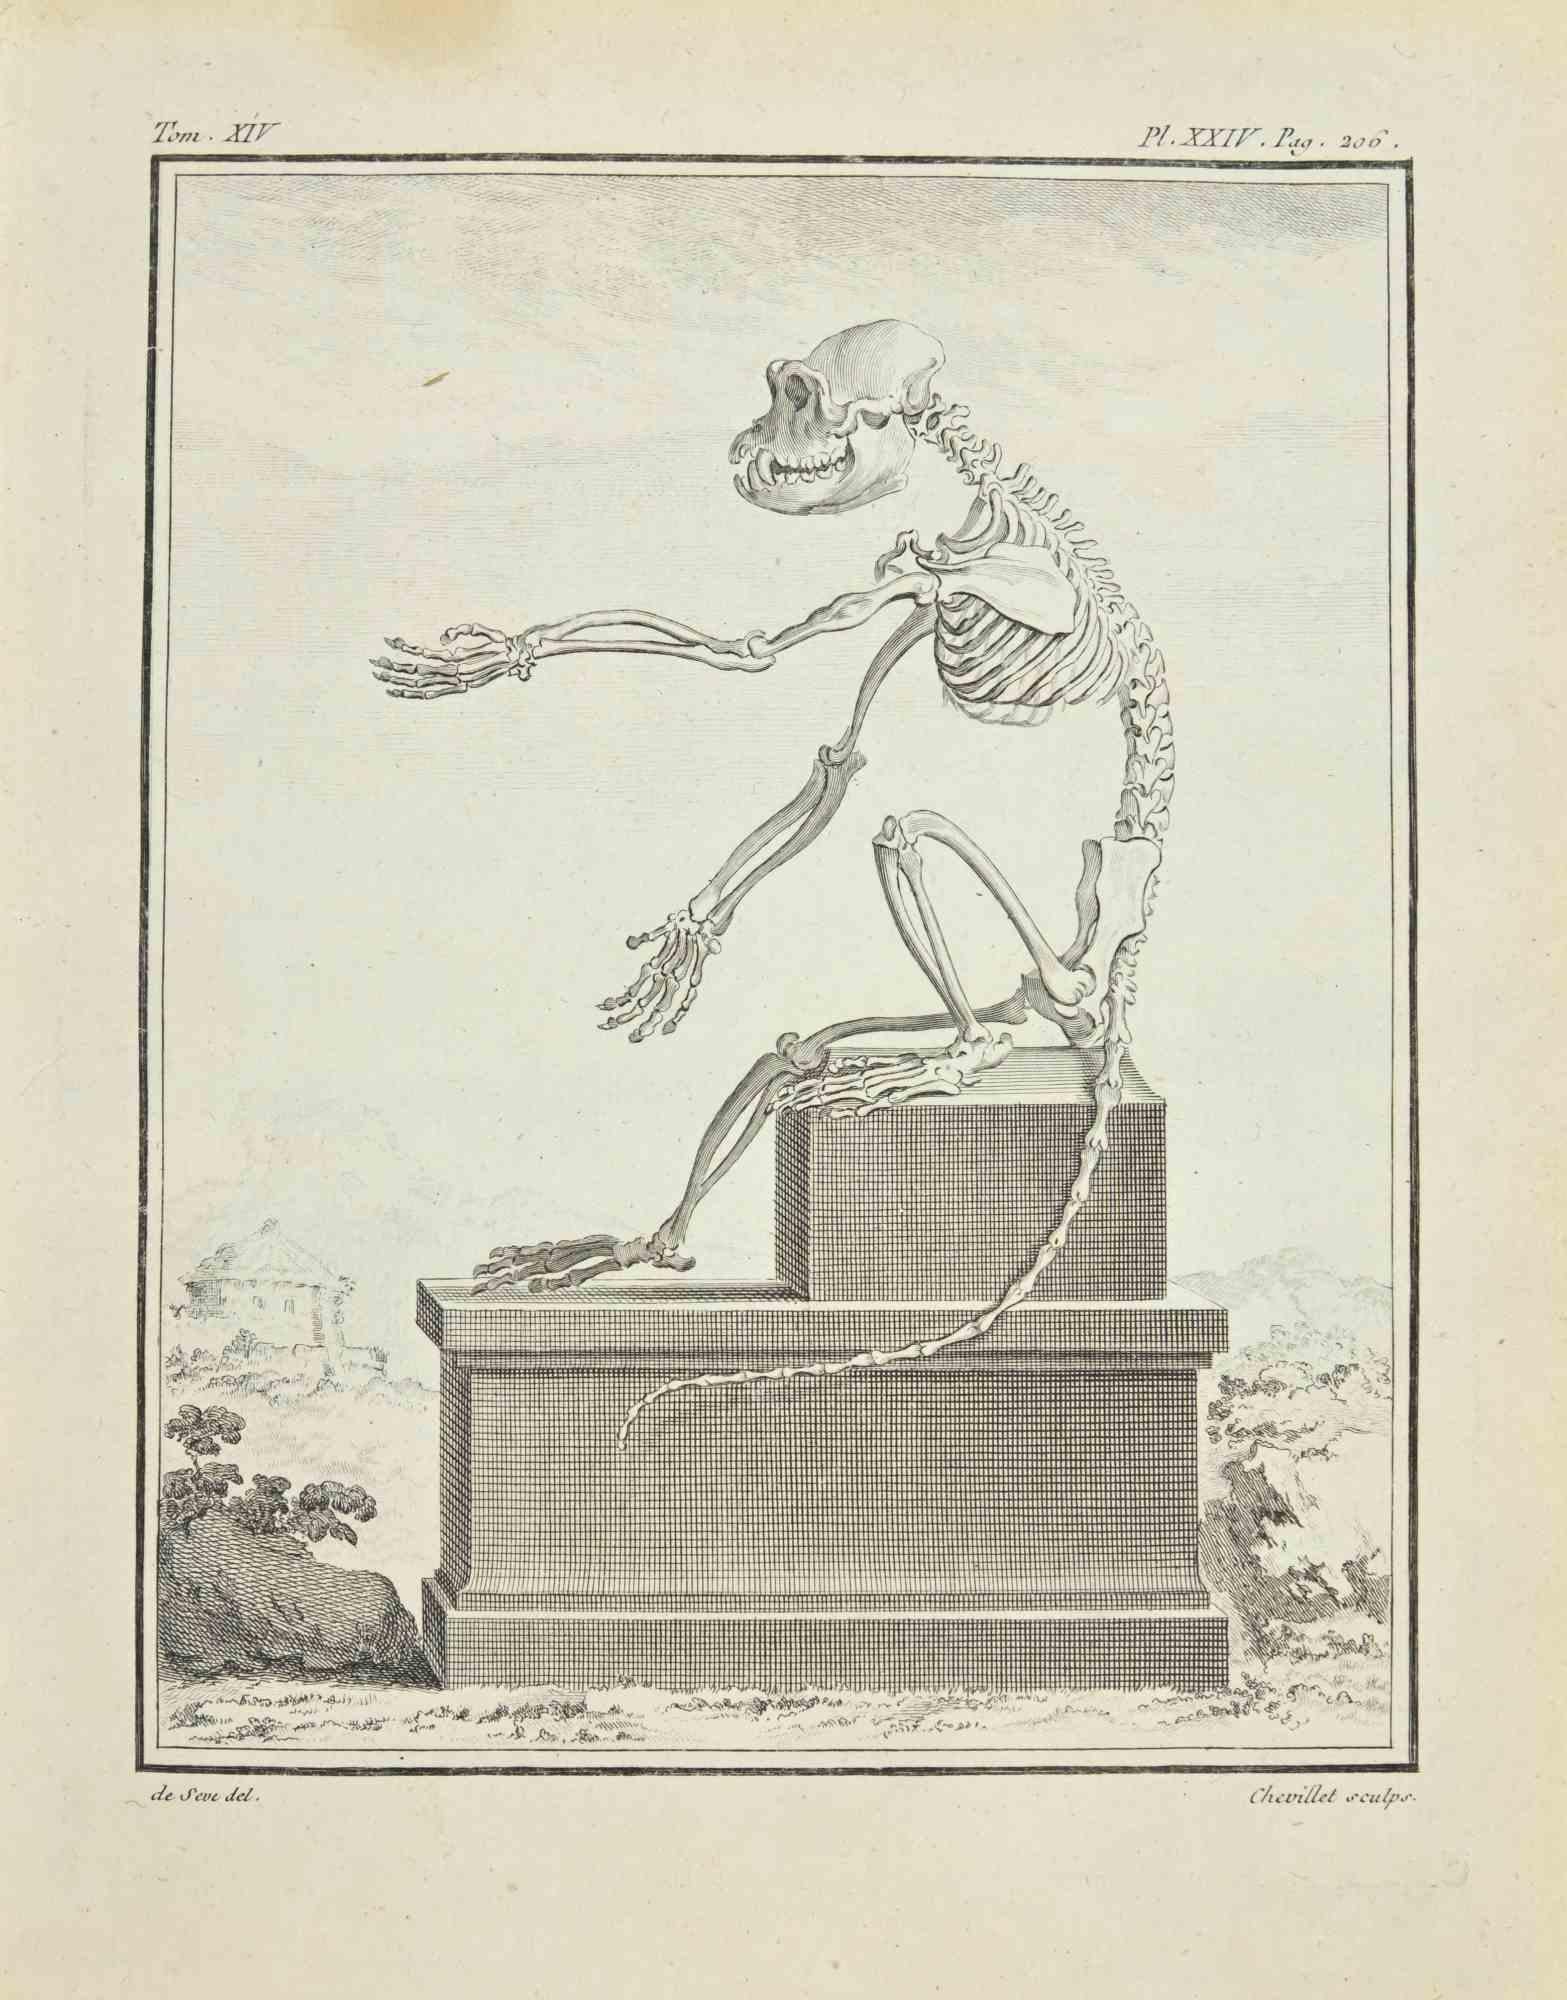 The Skeleton is an etching realized by Juste Chevillet in 1771.

It belongs to the suite "Histoire Naturelle de Buffon".

The Artist's signature is engraved lower right.

Good conditions with slight foxing.